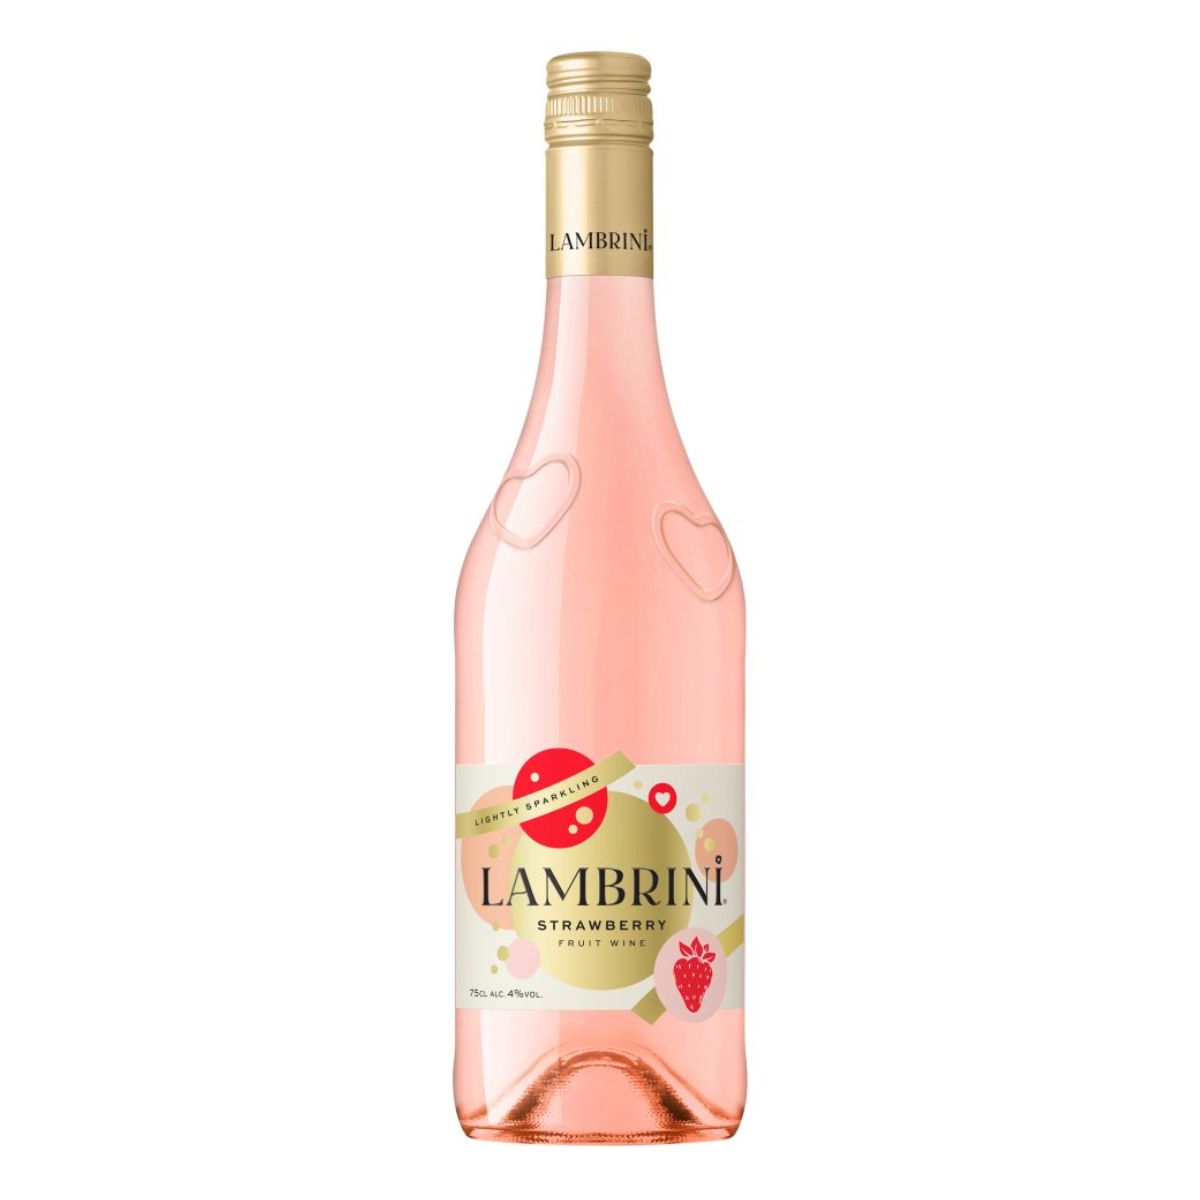 A bottle of Lambrini - Strawberry (4.0% ABV) - 750ml on a white background.